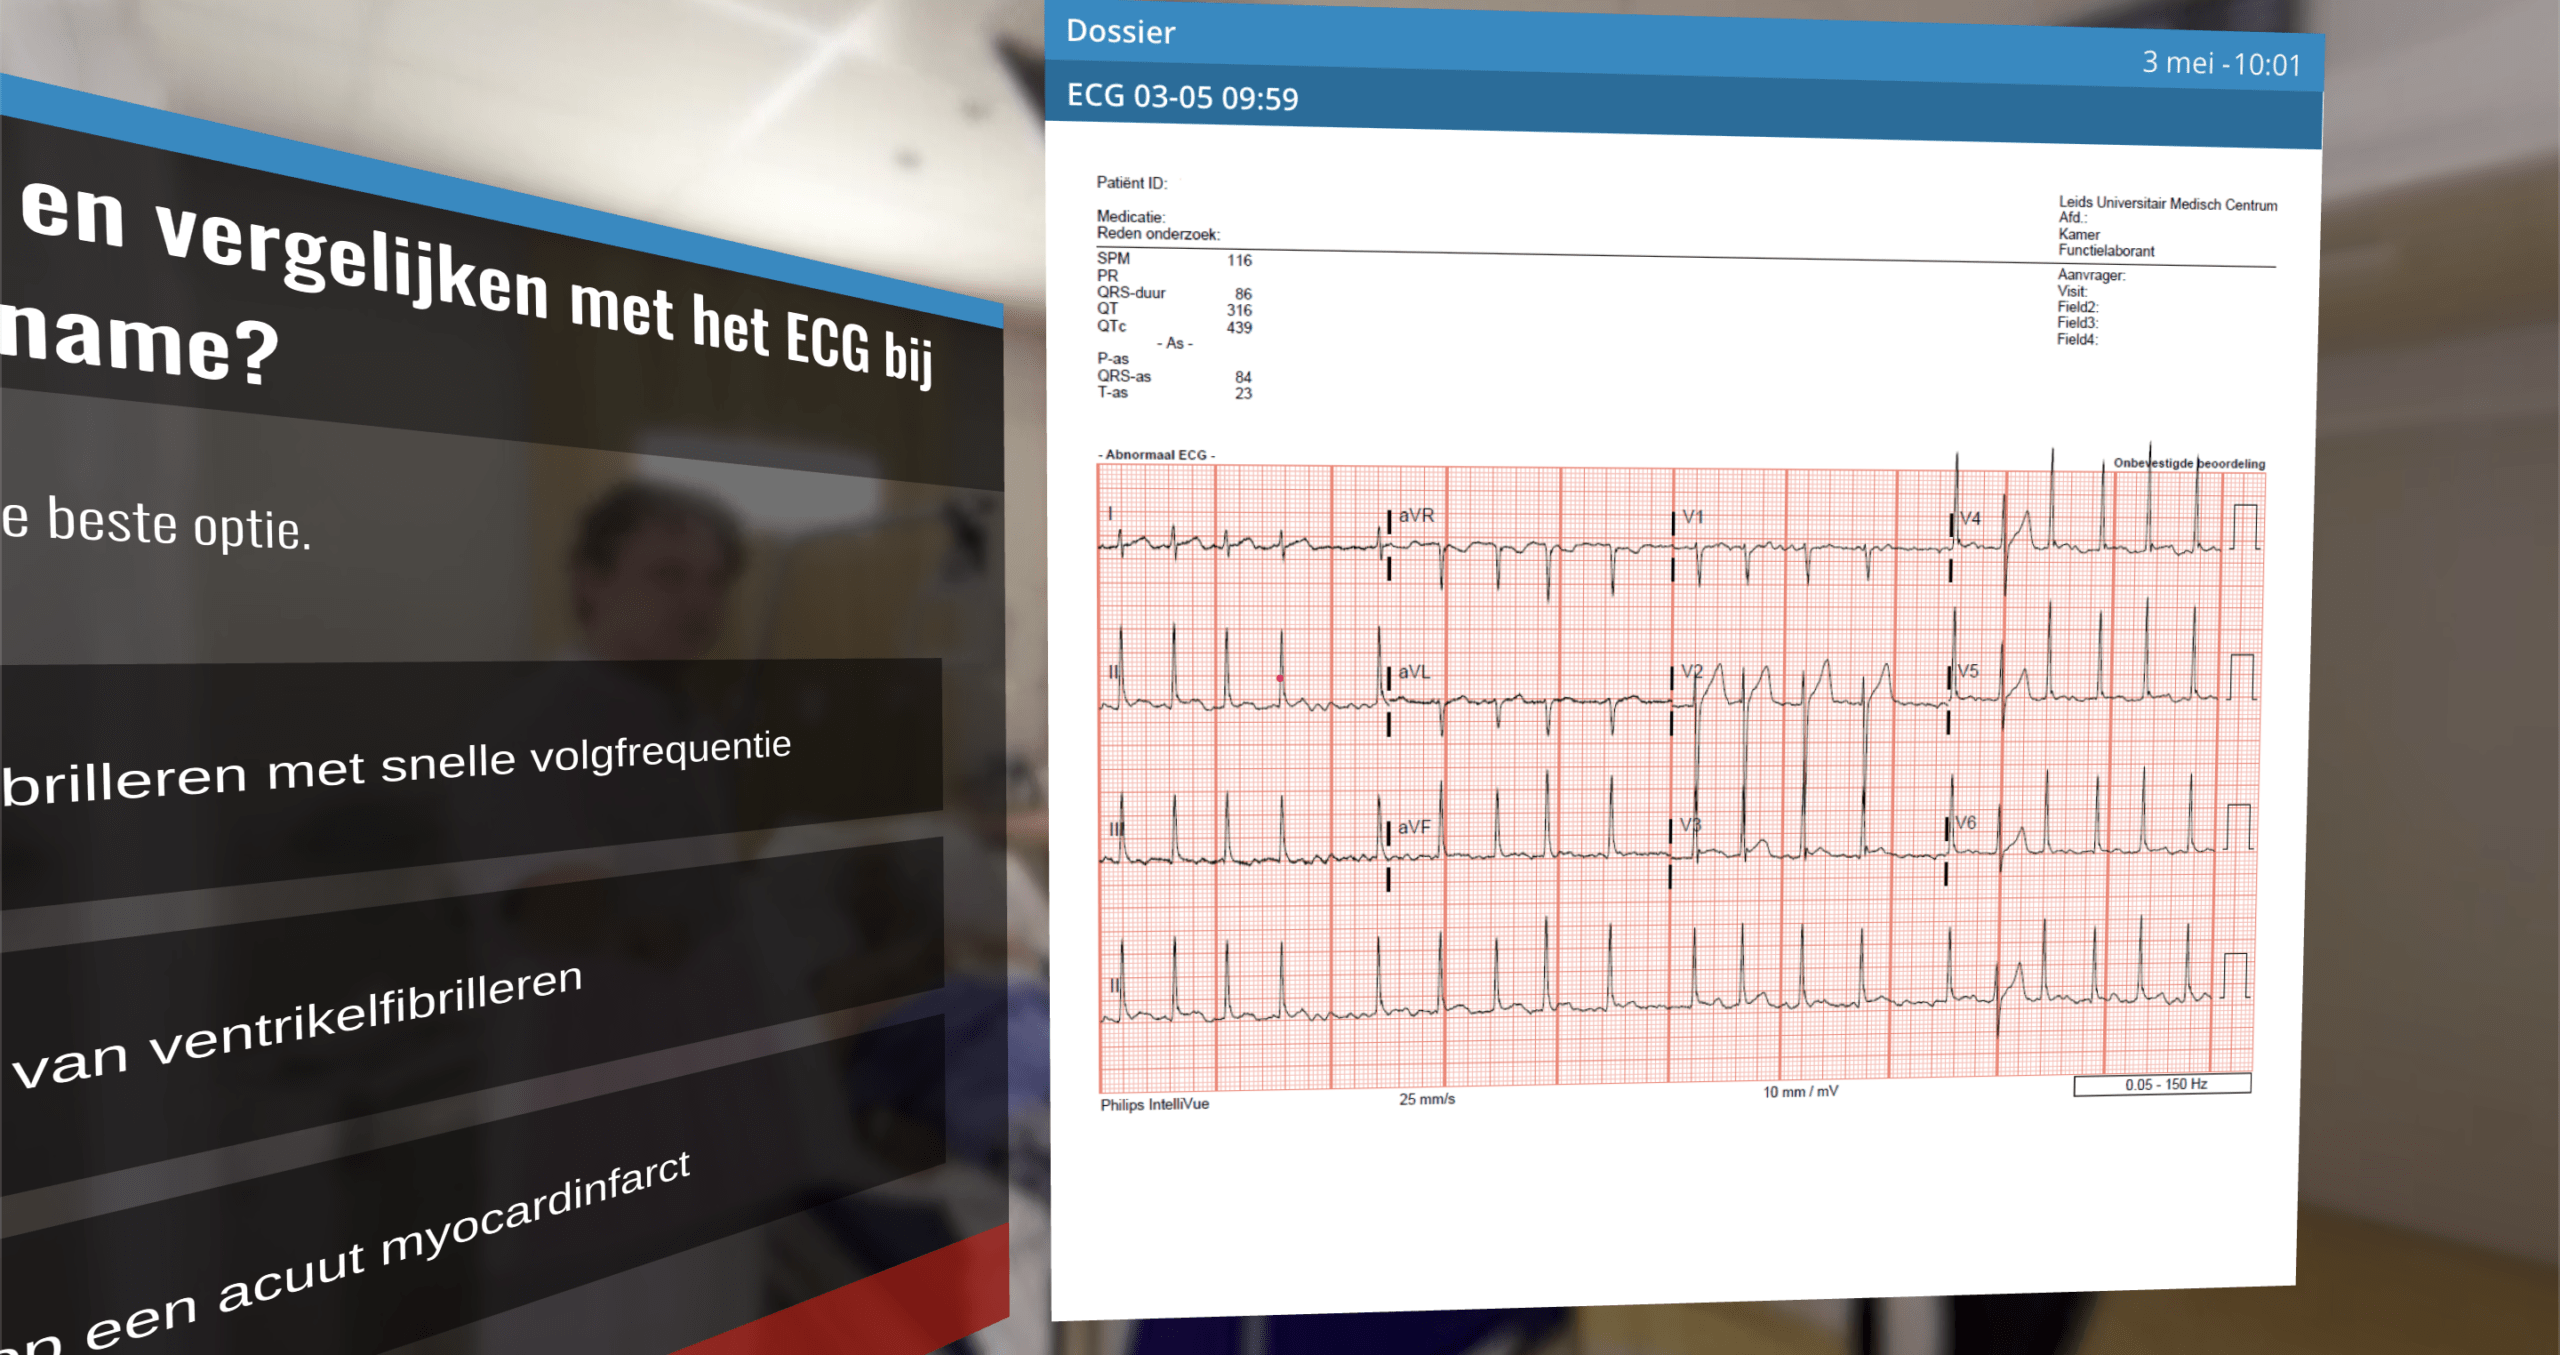 Users can choose to consult elements from the patient’s Electronic Health Record, such as ECG’s captured.